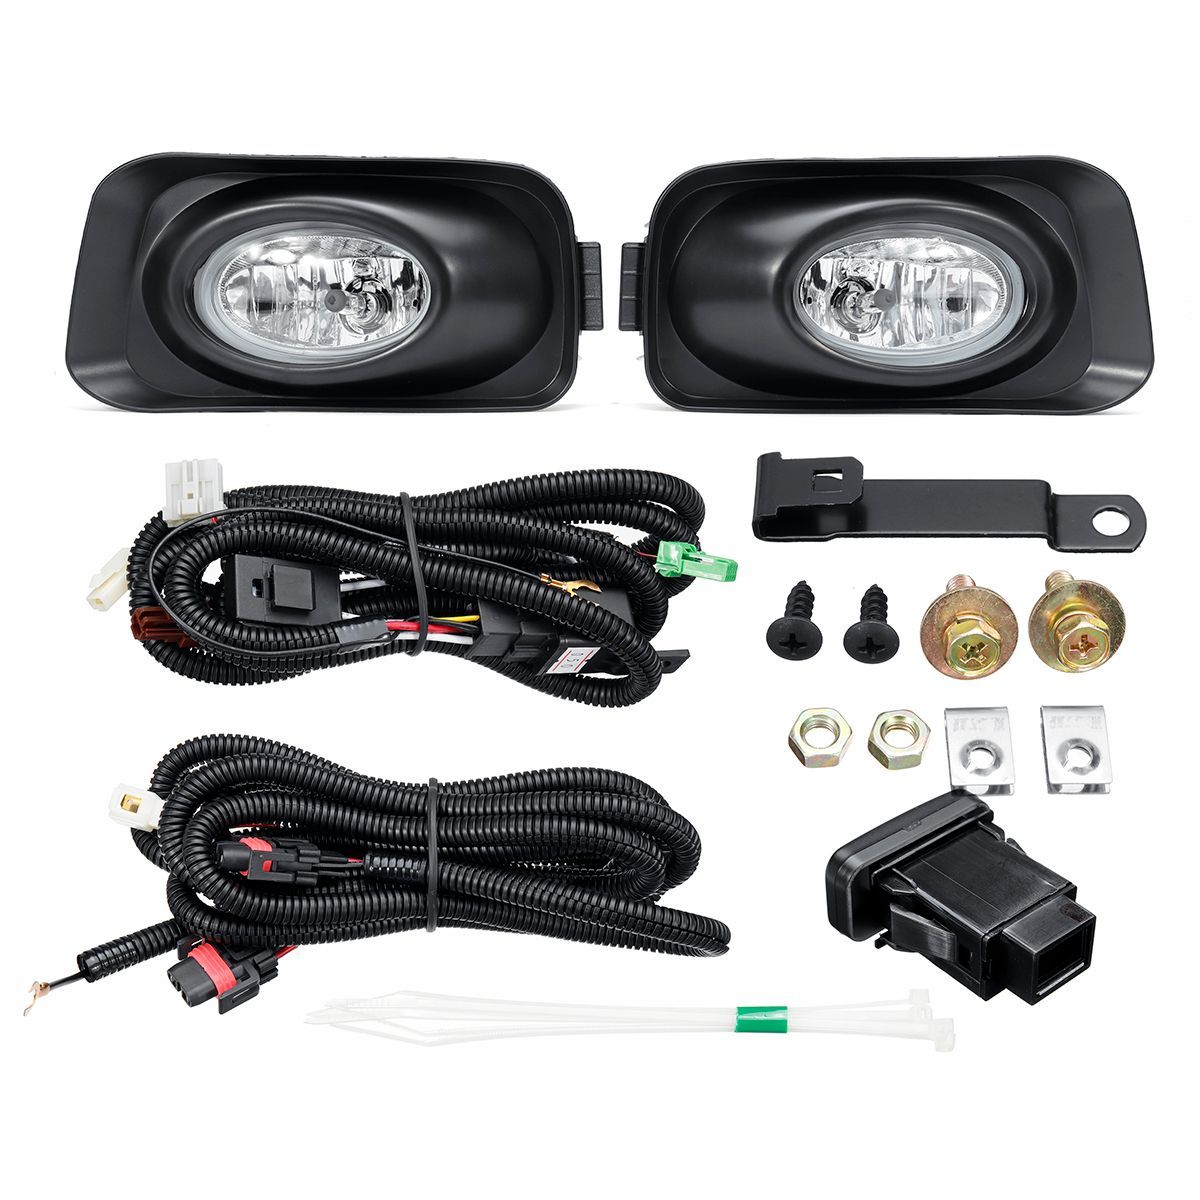 2Pcs-Car-Front-Bumper-Fog-Lights-Auto-Lamps-H11-Bulb-12V-With-Covers-Kit-For-Honda-Accord-2003-2008-1674205